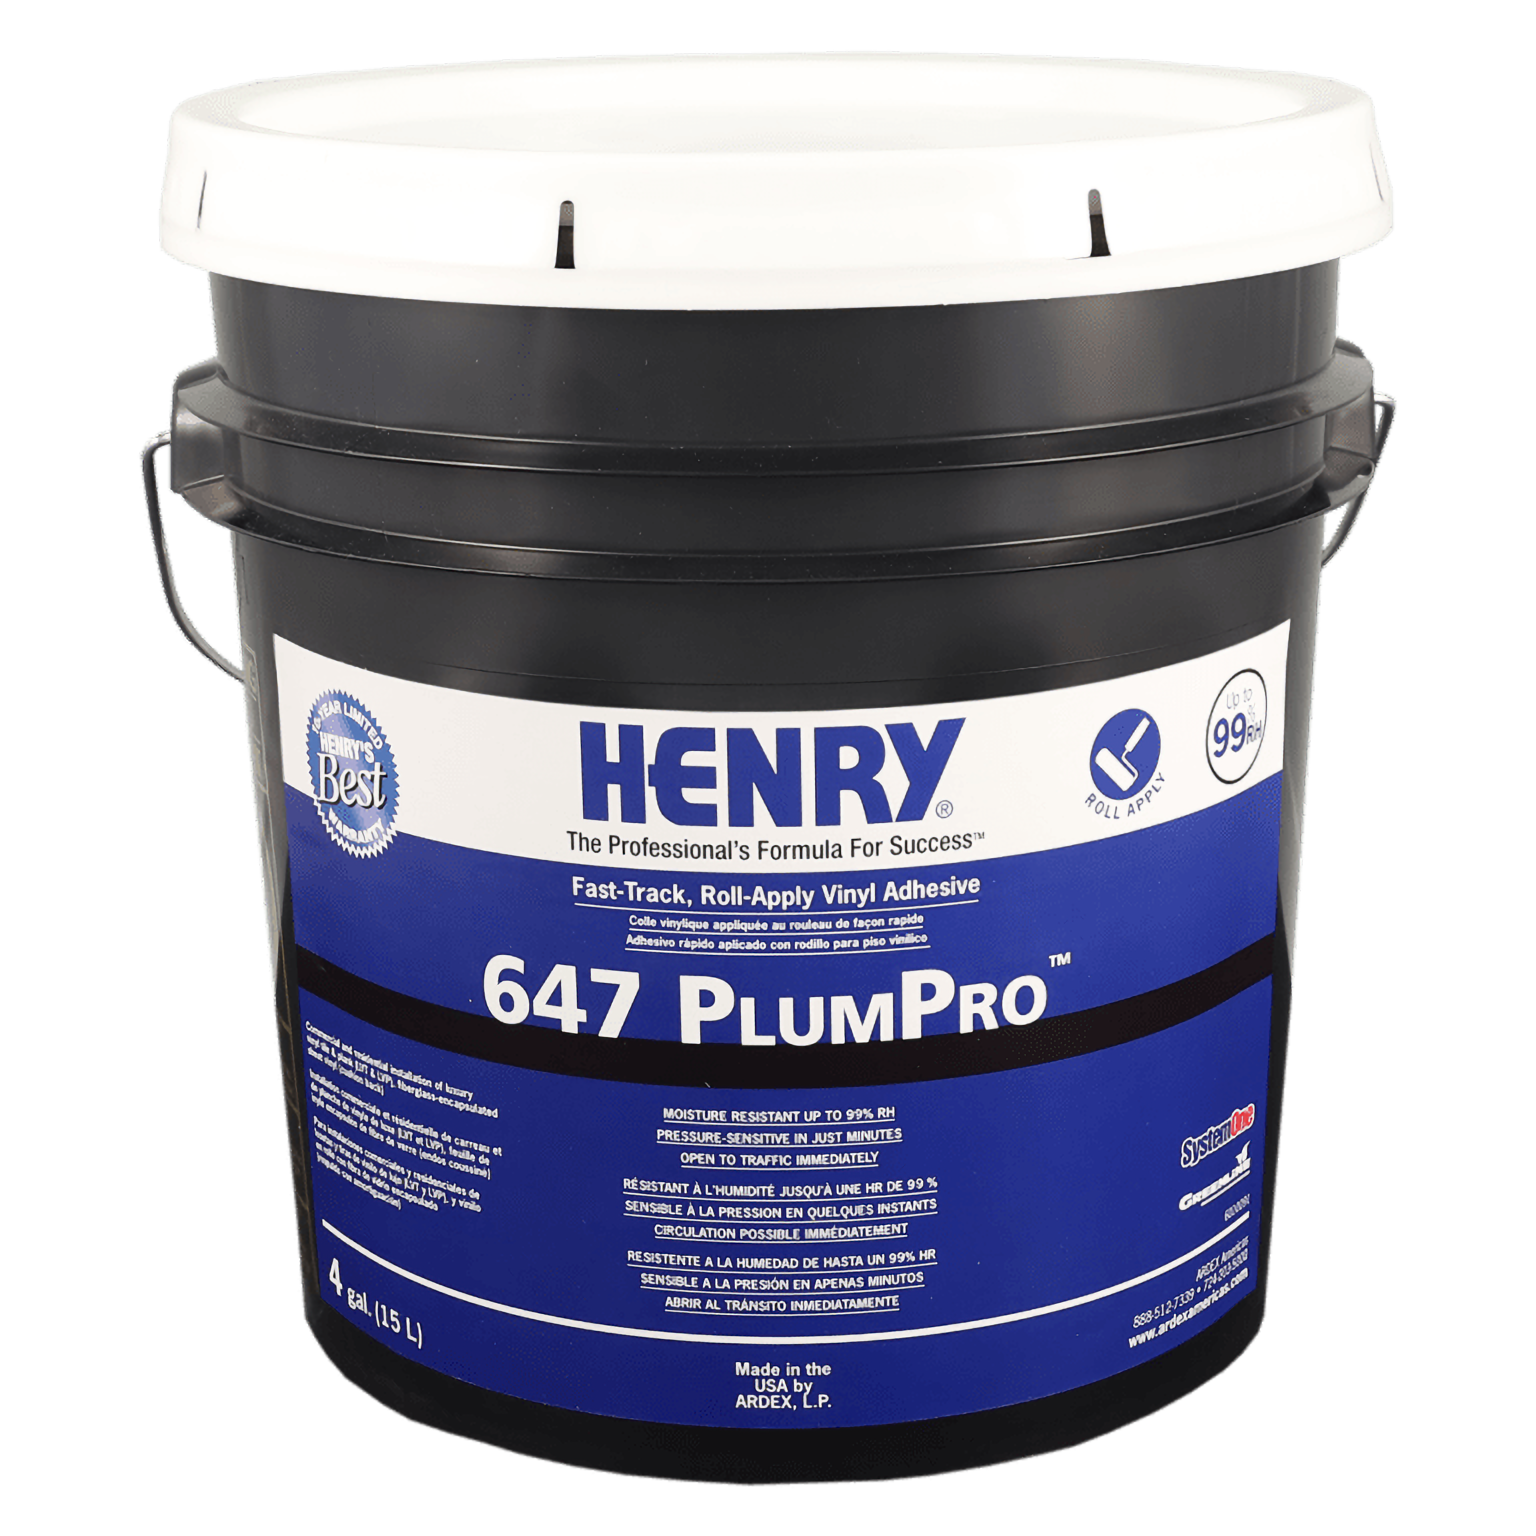 HENRY 647 Plumpro Rolling Adhesive